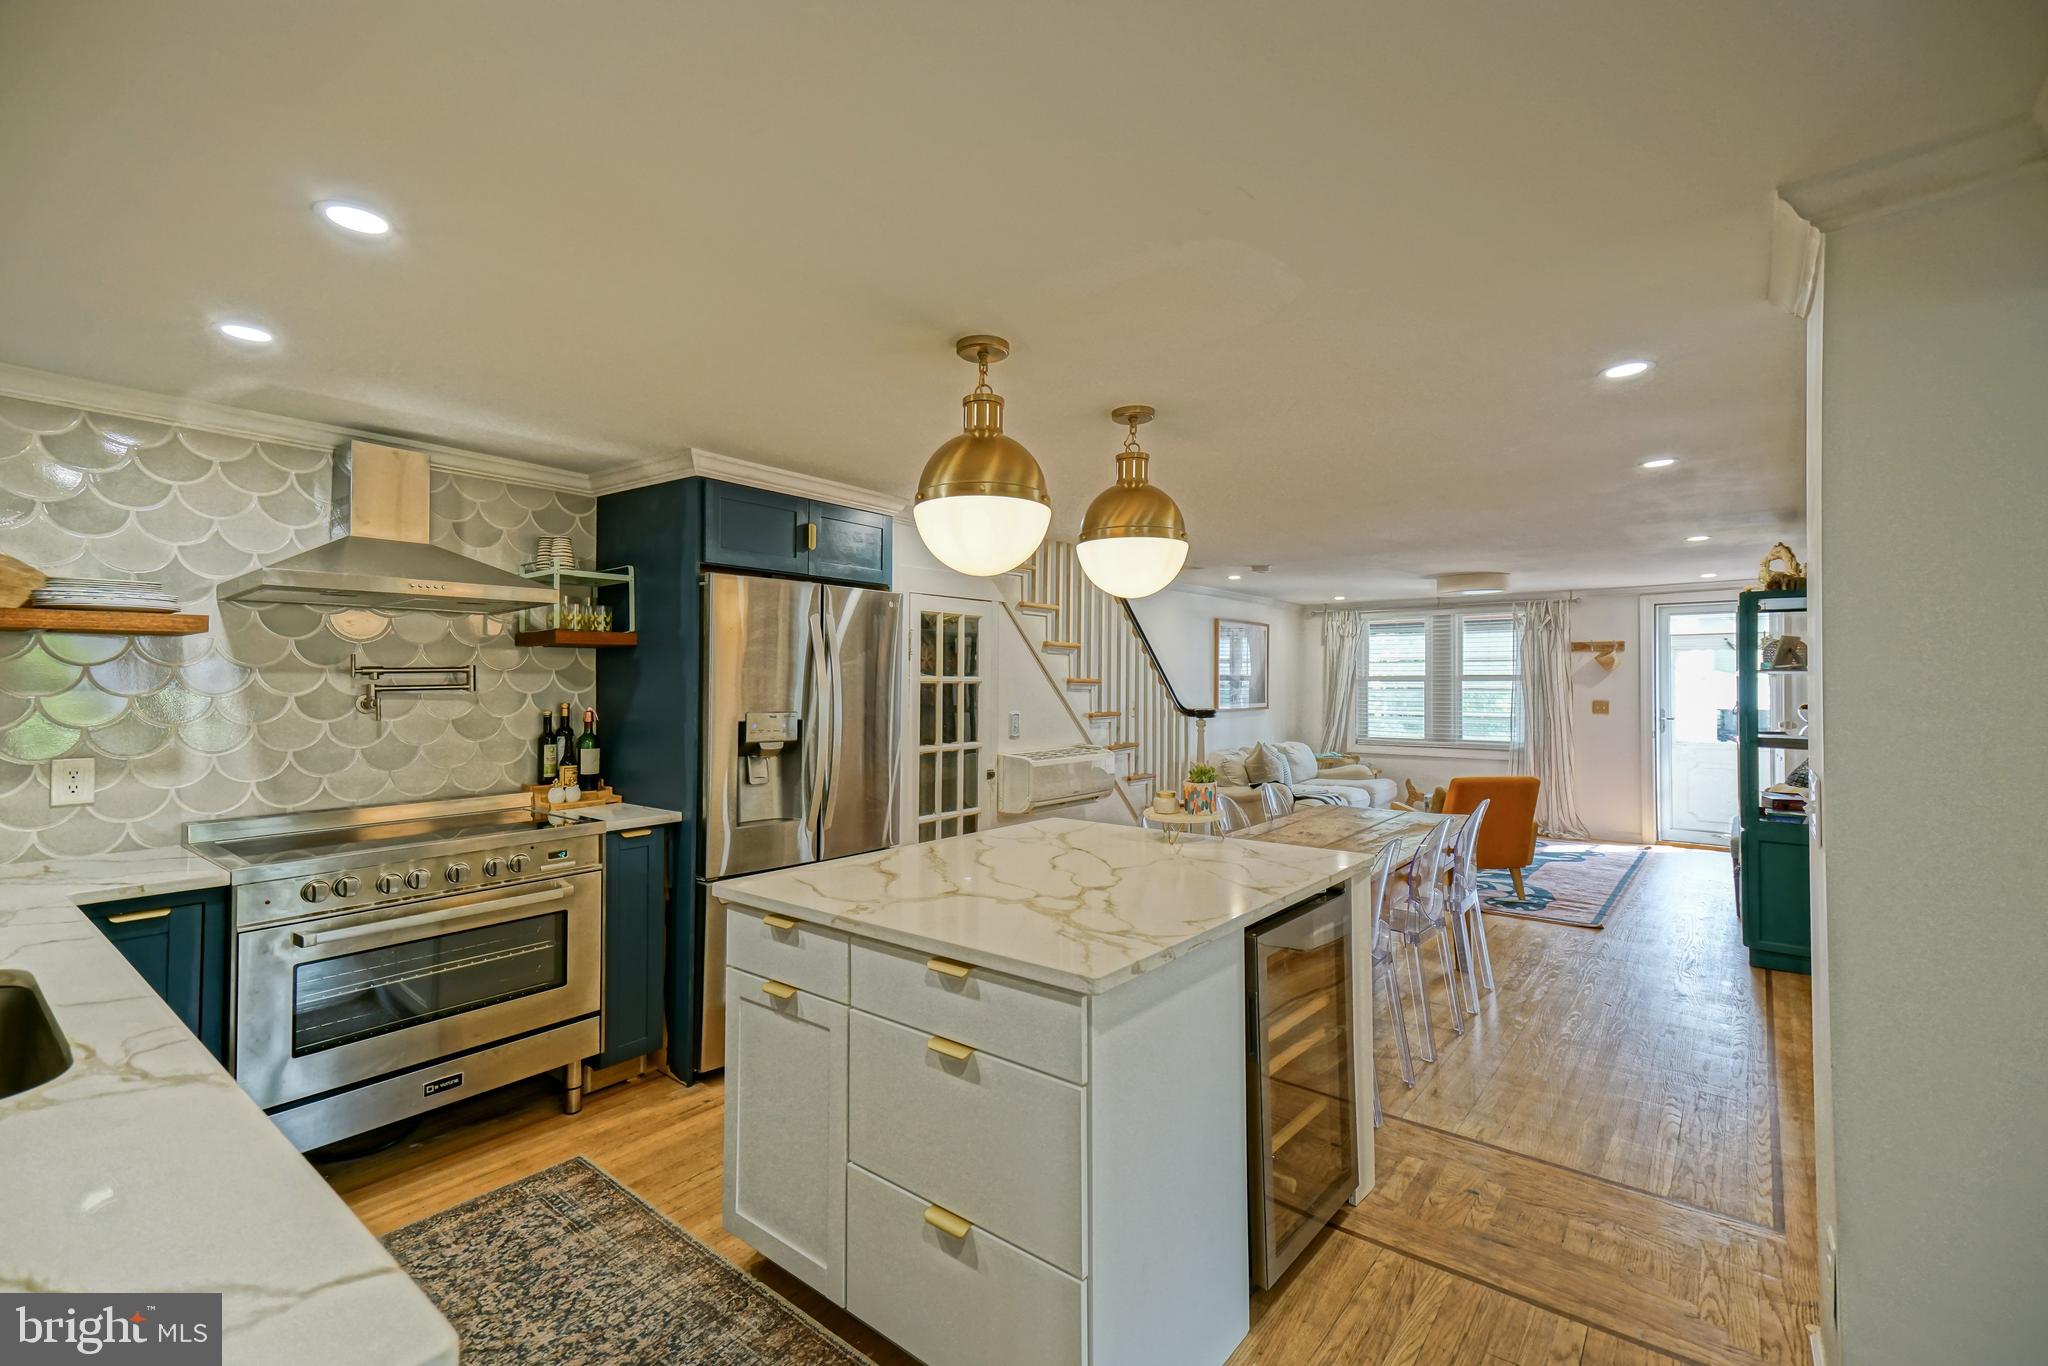 LIVE IN DOWNTOWN LEWES - Charming four-bedroom home in the Historic district makes the perfect beach